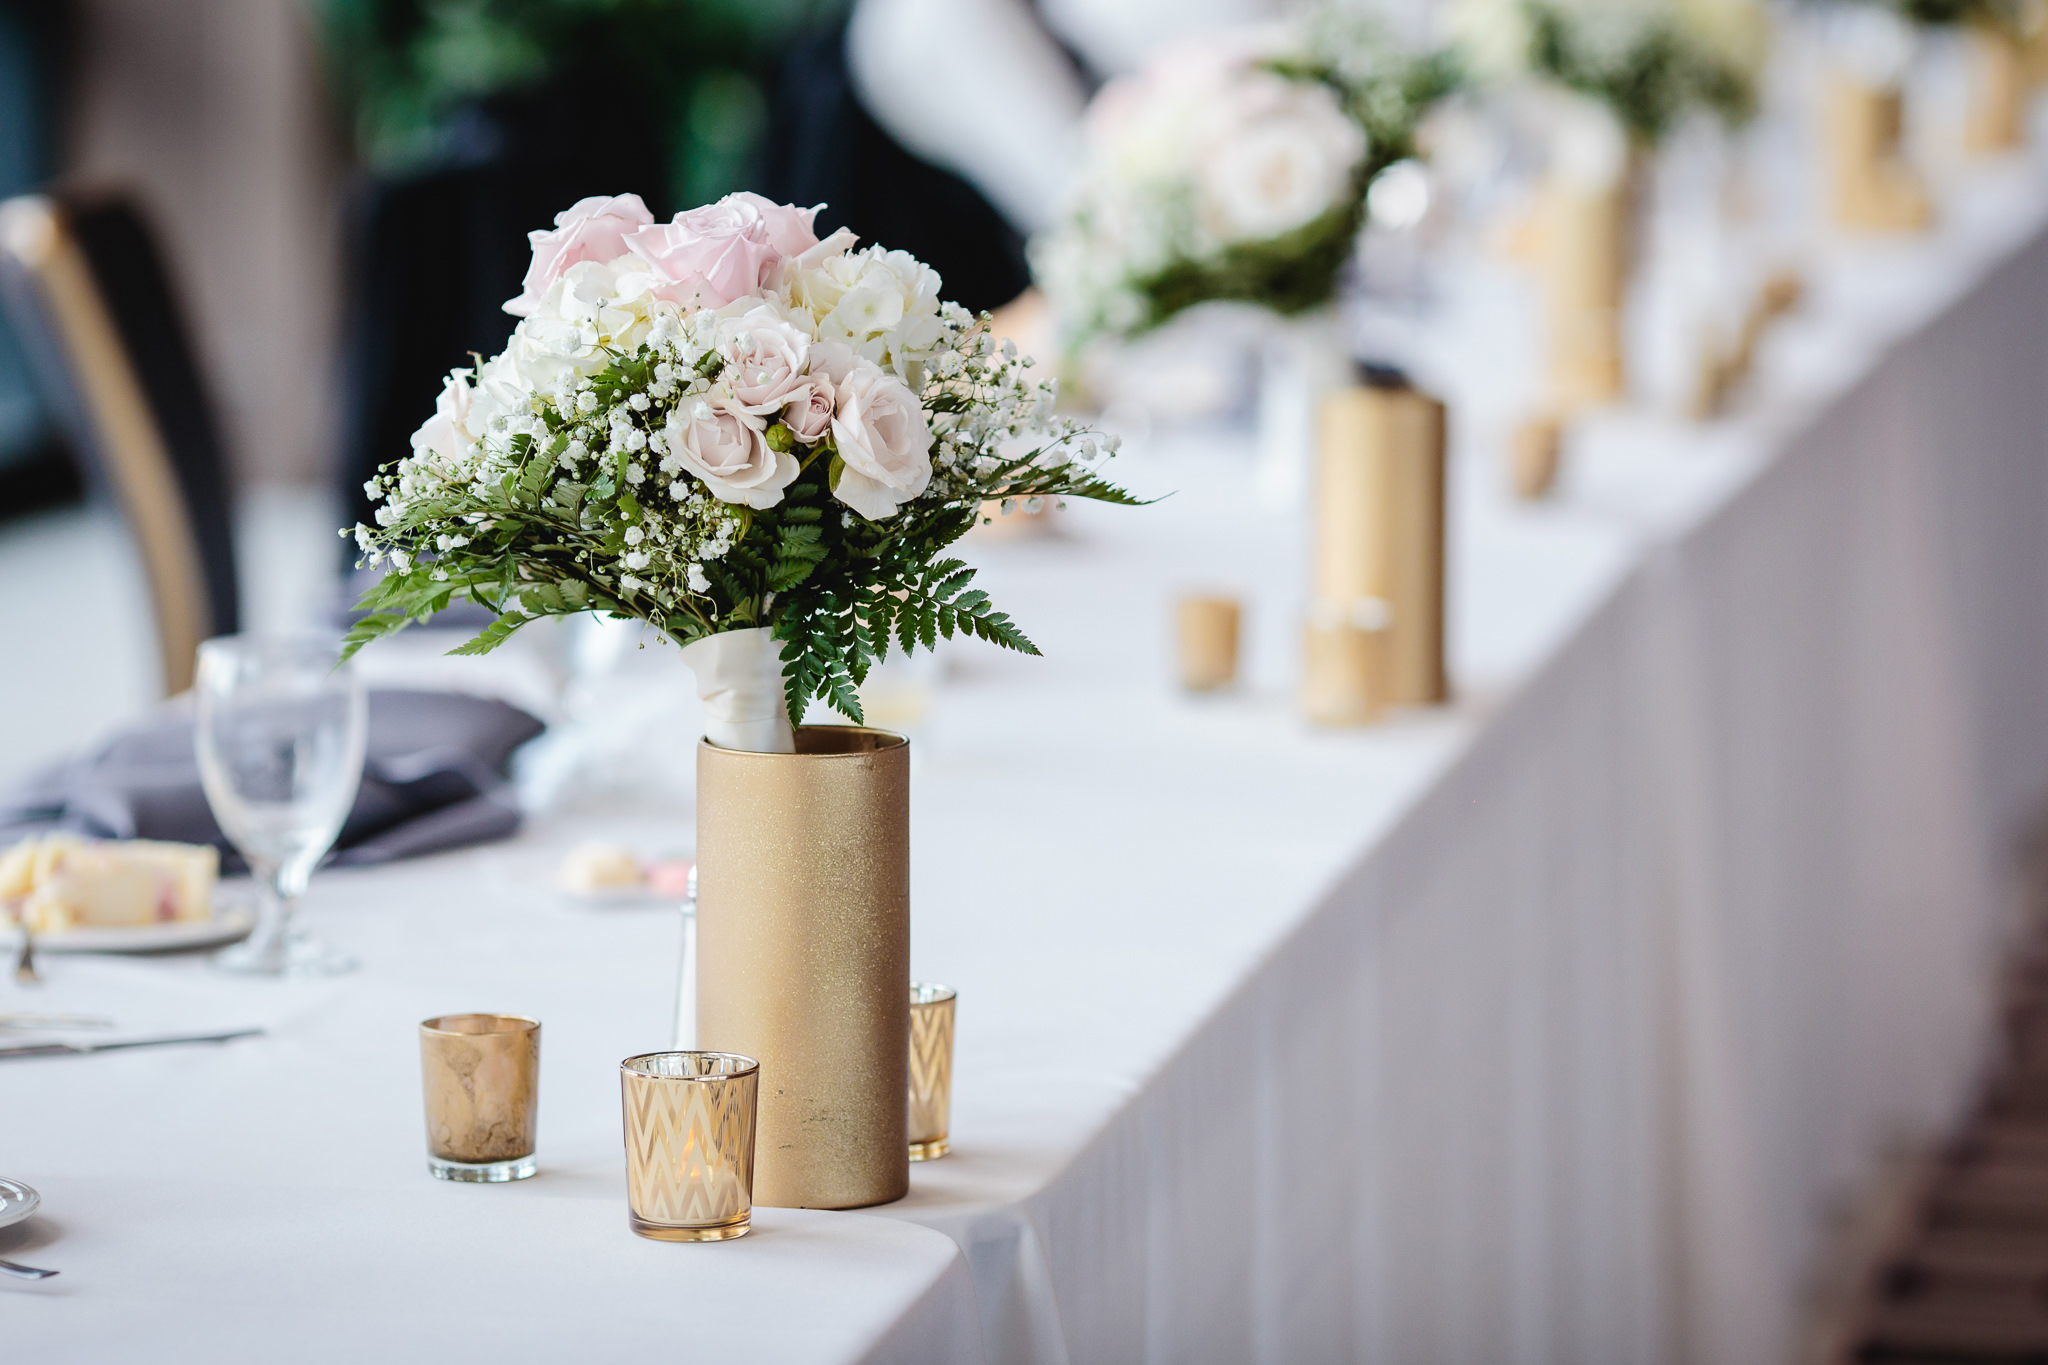 Bridesmaids' bouquets decorate the head table at Duquesne University